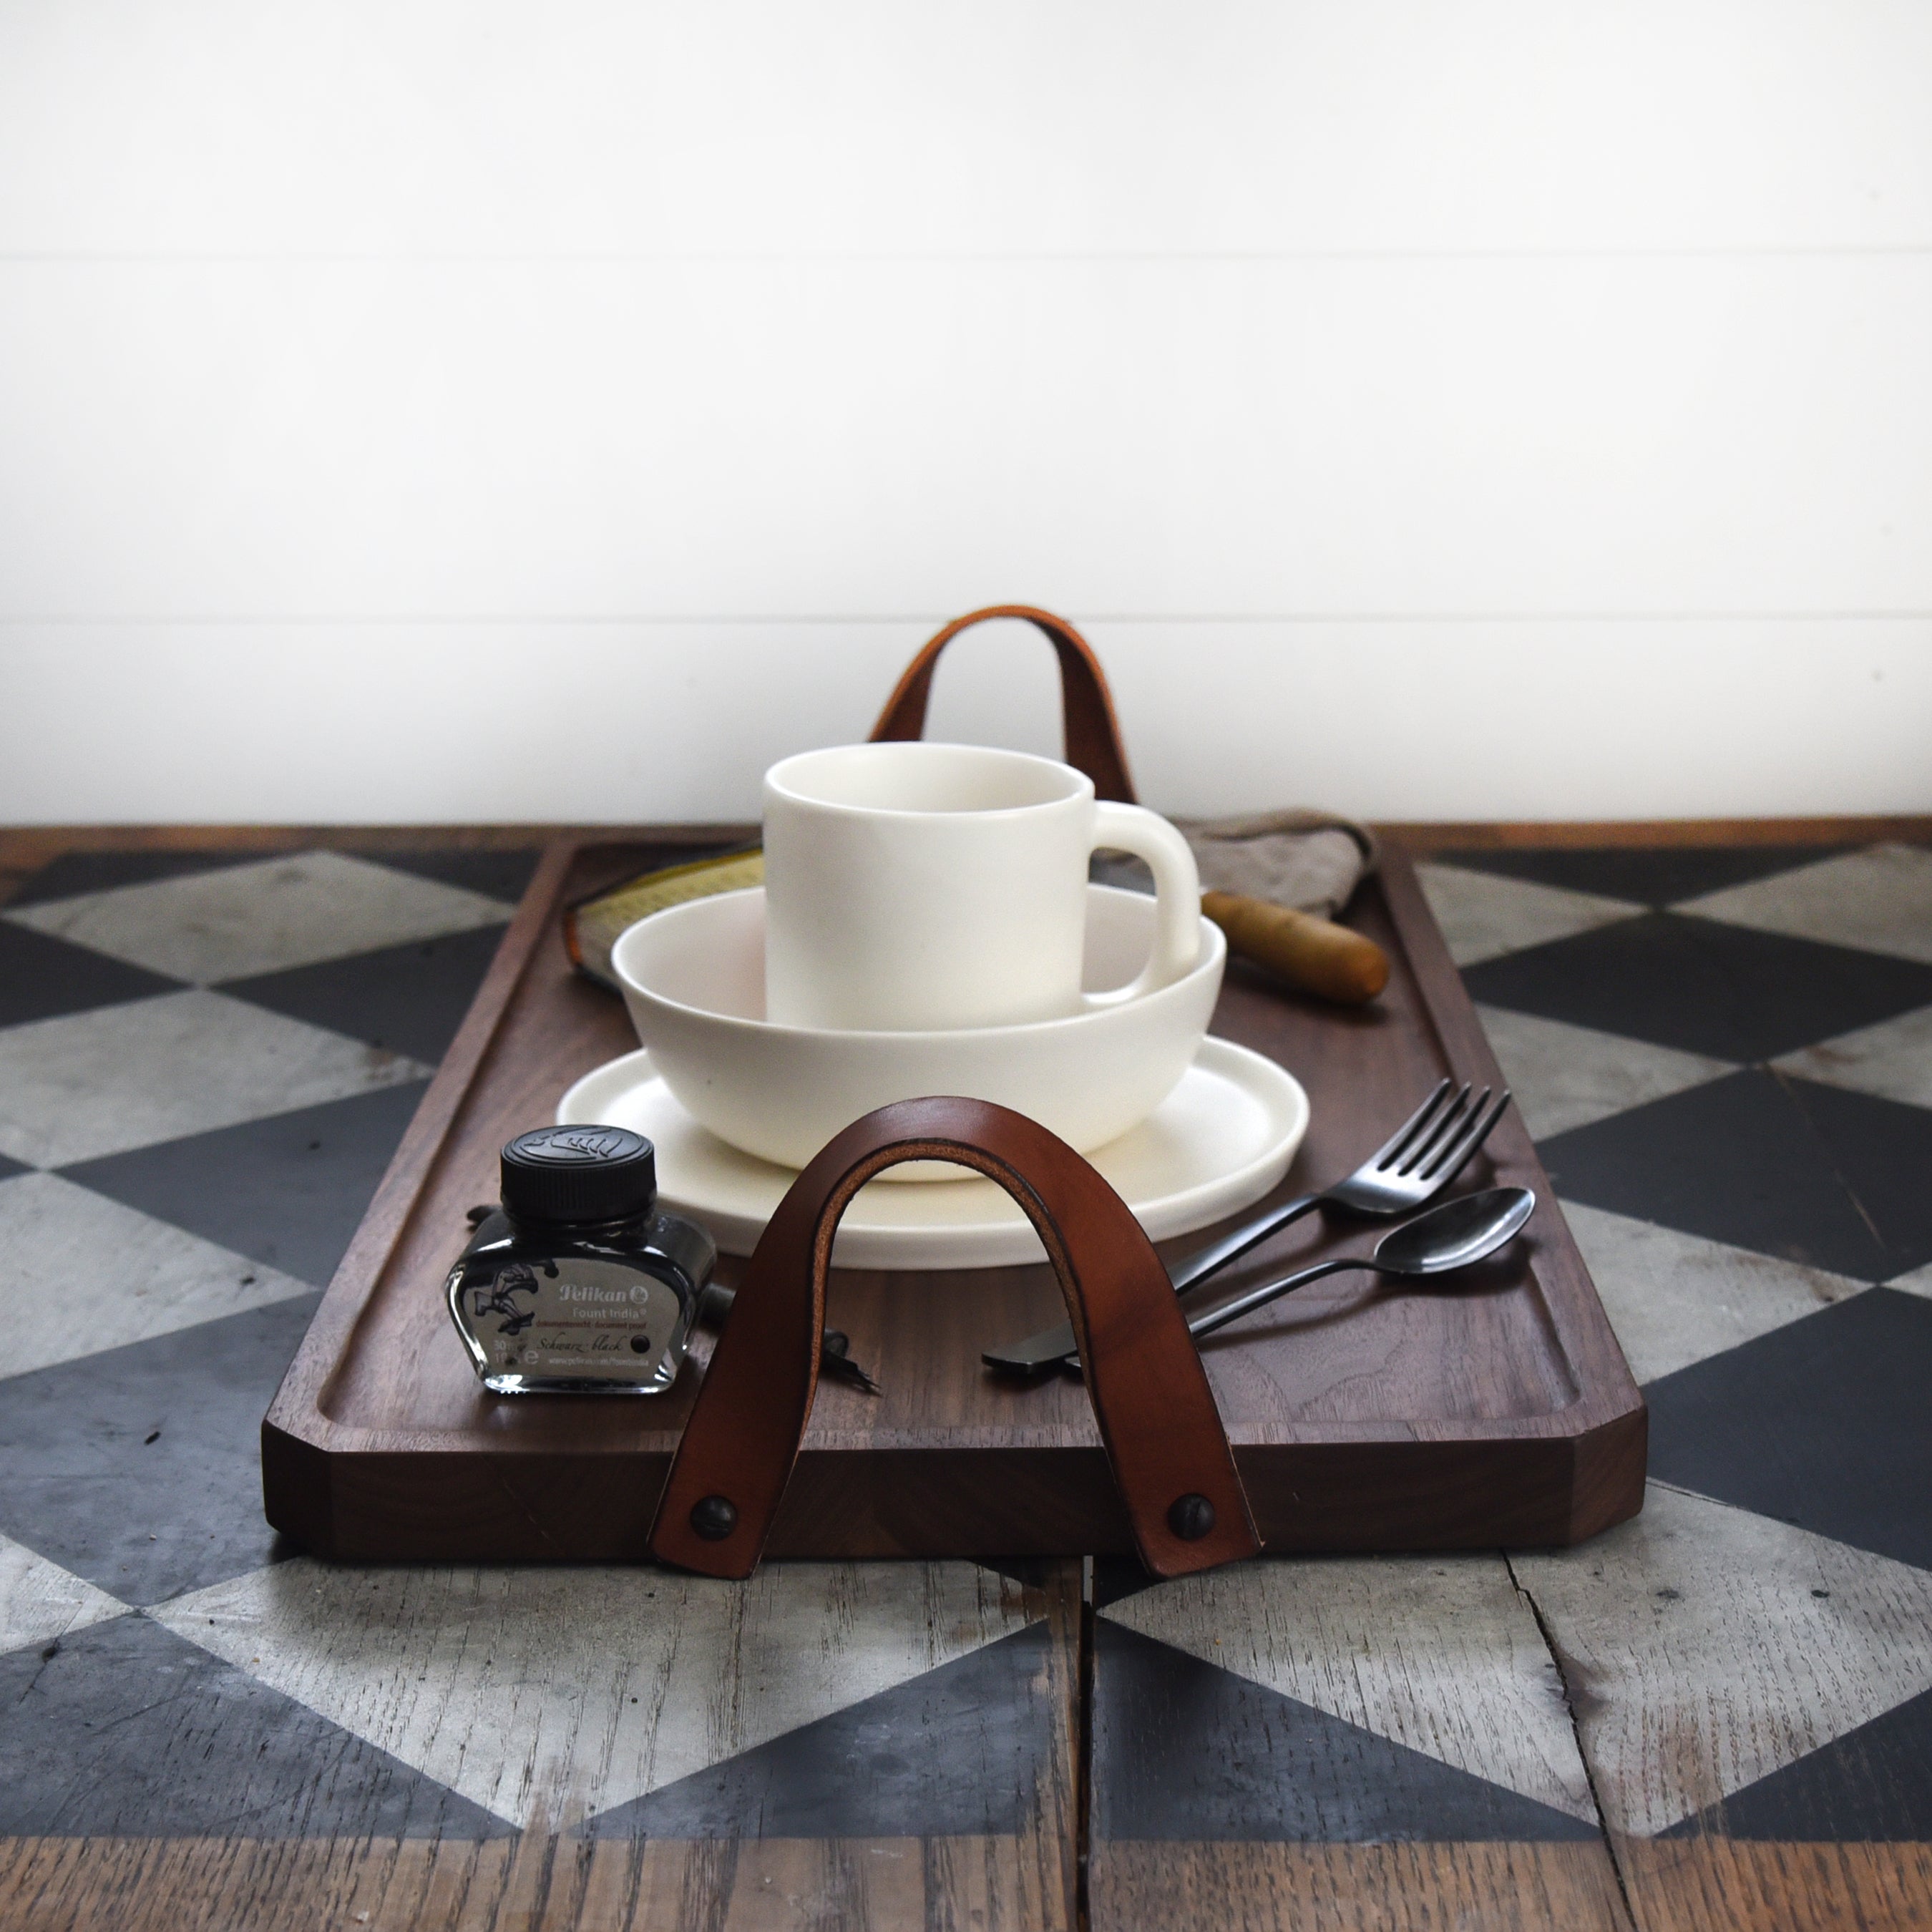 The Watson Serving Tray